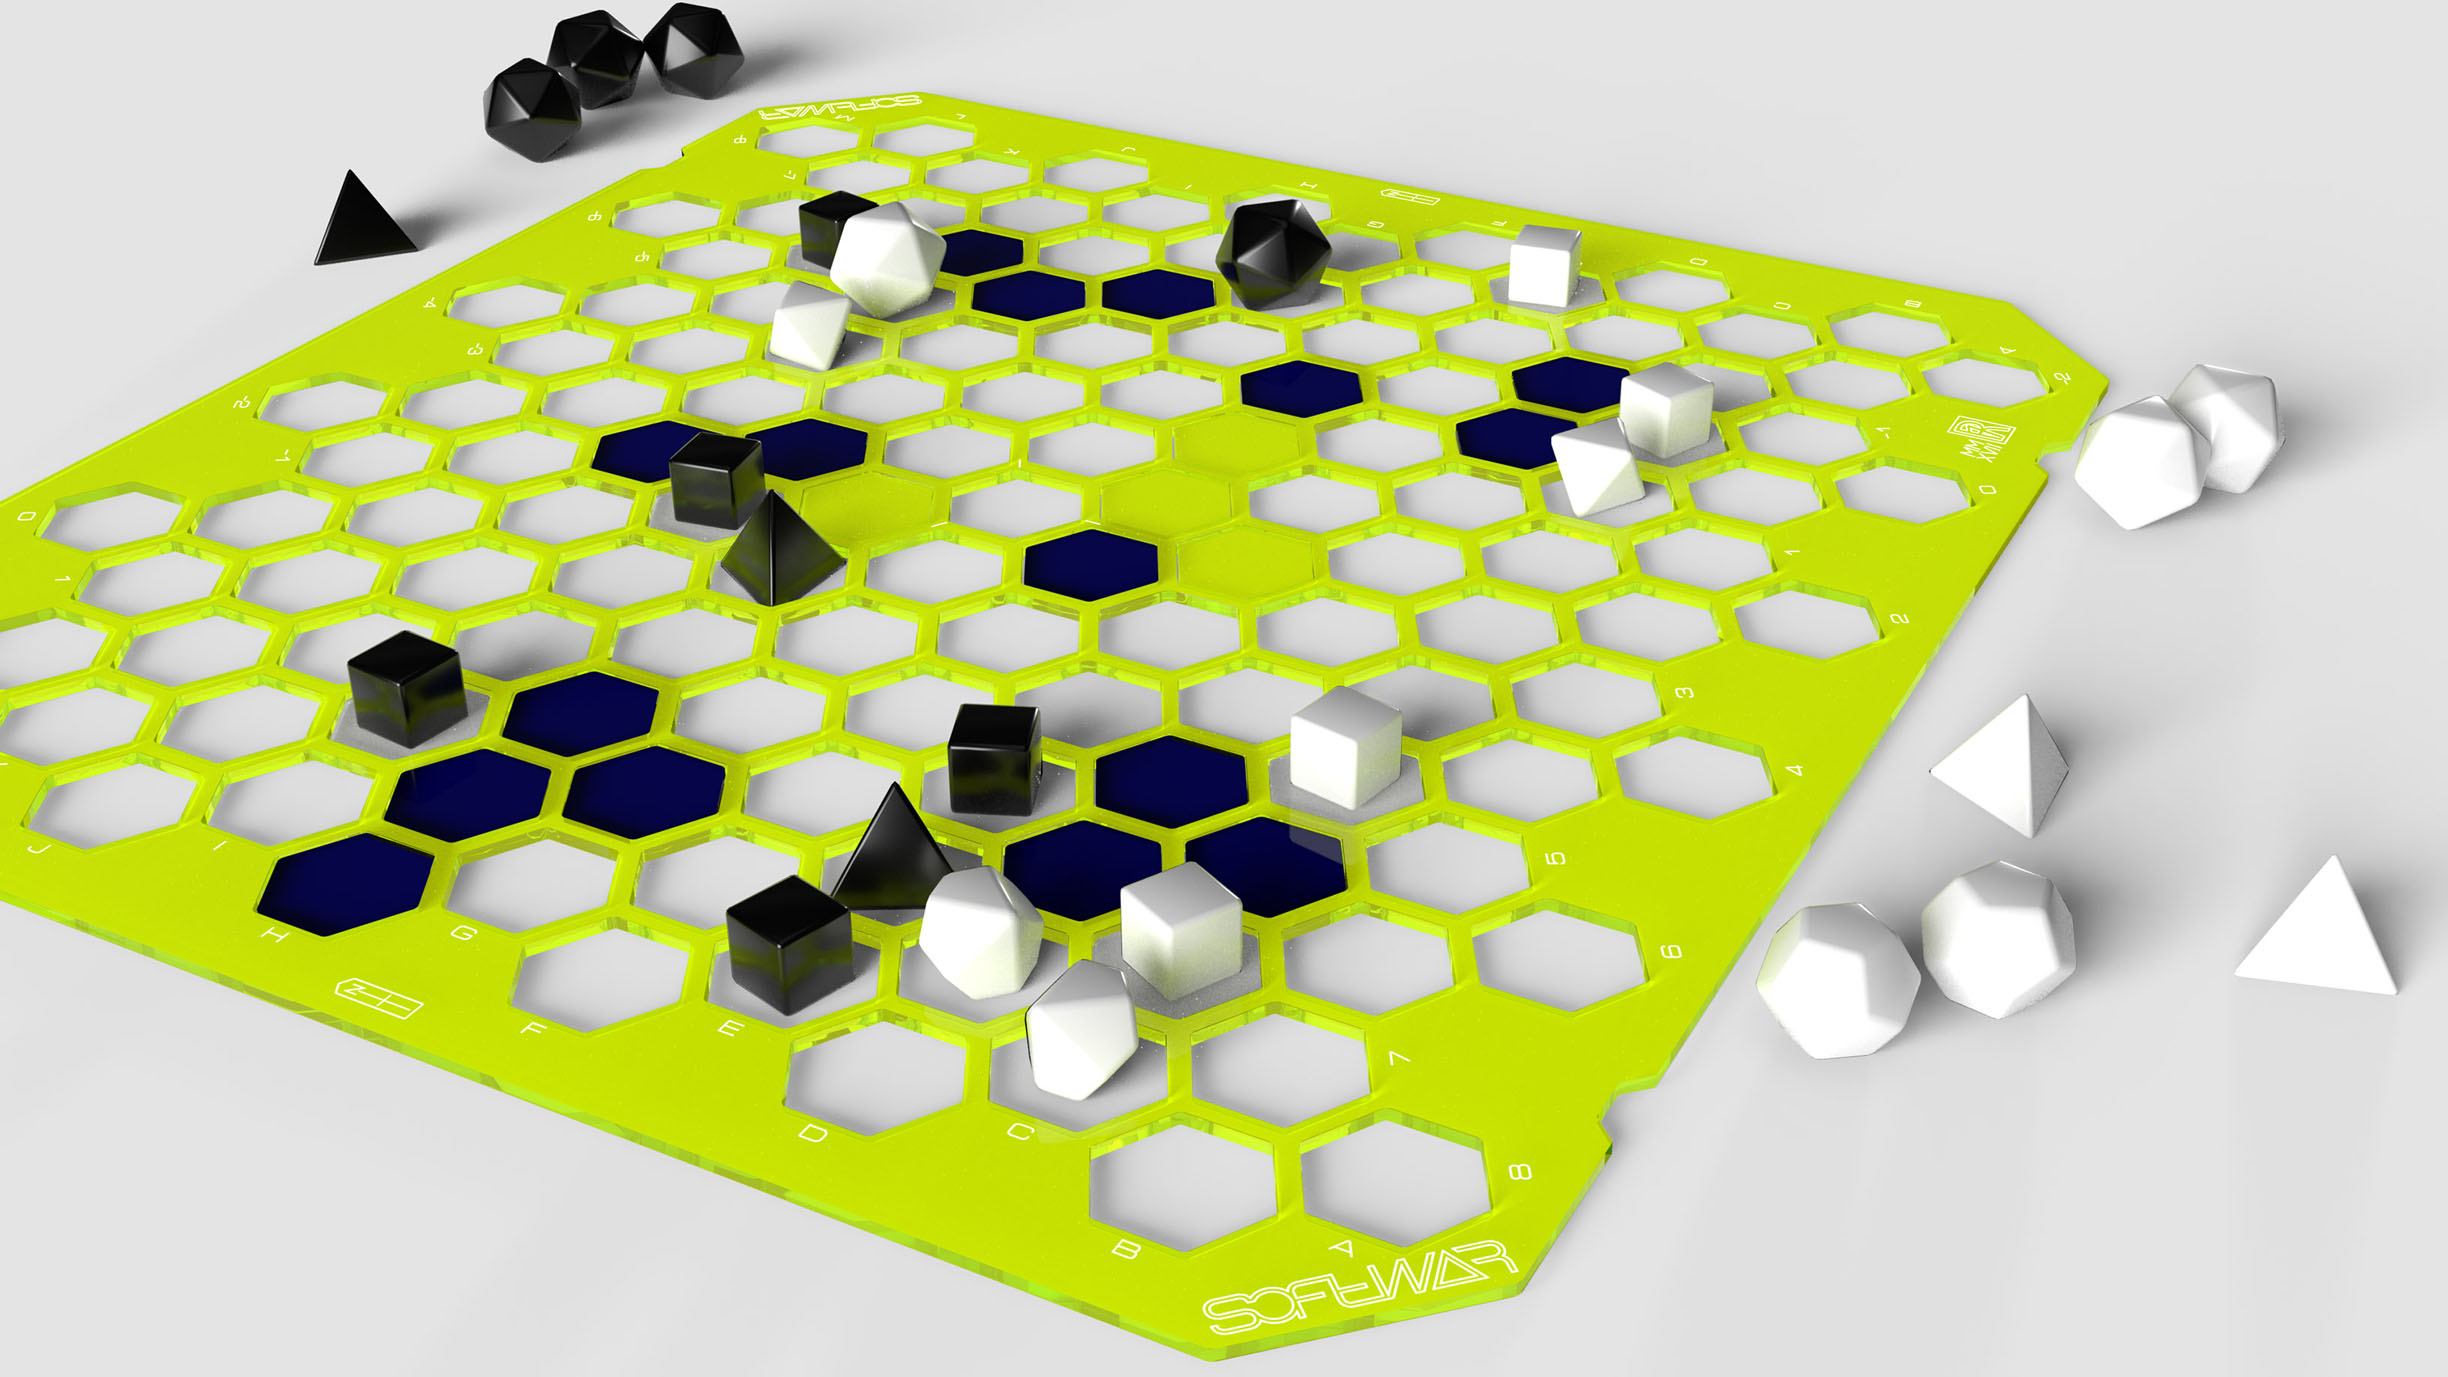 Fluorescent Yellow with Blue tiles | Black and White dice